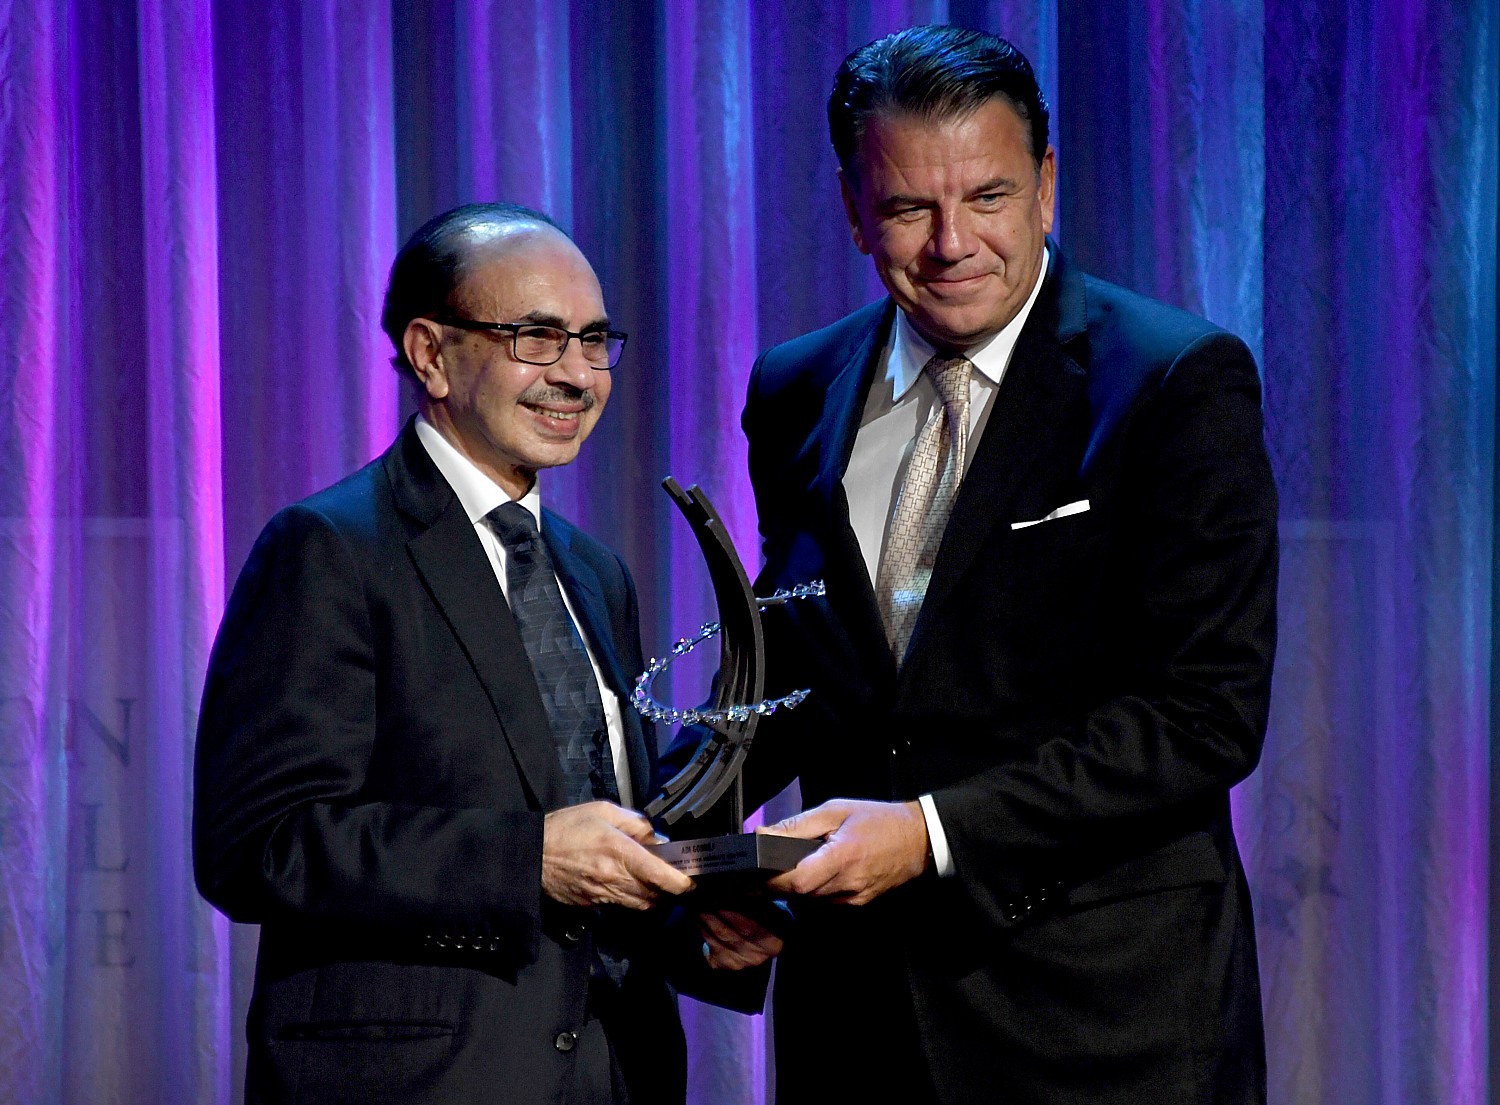 Adi Godrej, chairman of Godrej Group is his presented with the Global Citizen Award for Leadership in the Private Sector from Hikmet Ersek President & CEO of The Western Union Company © 2016 Karen Rubin/news-photos-features.com